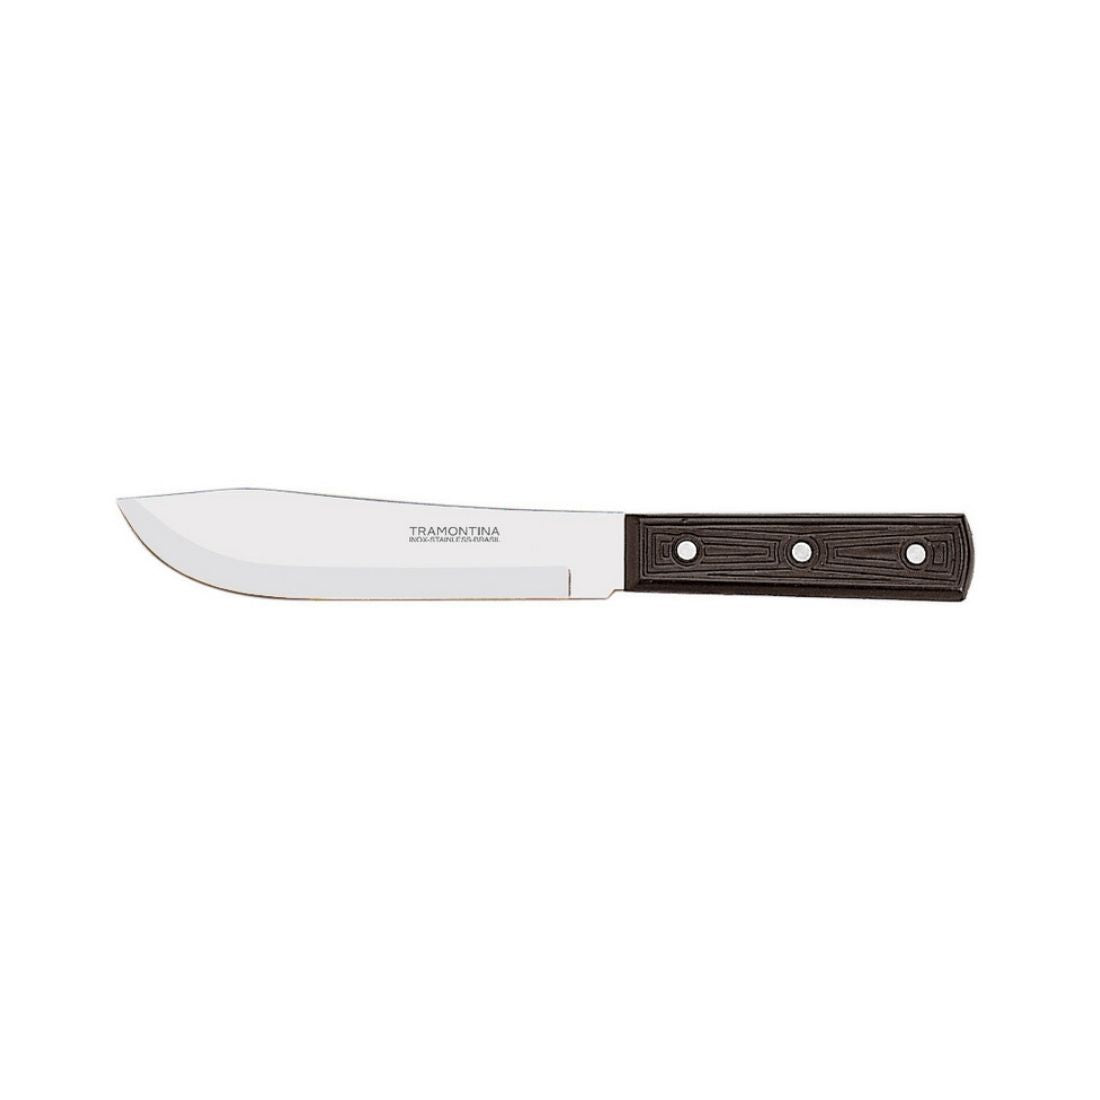 Butcher Knife (15 cm Stainless Steel Blade) - Universal - Tramontina